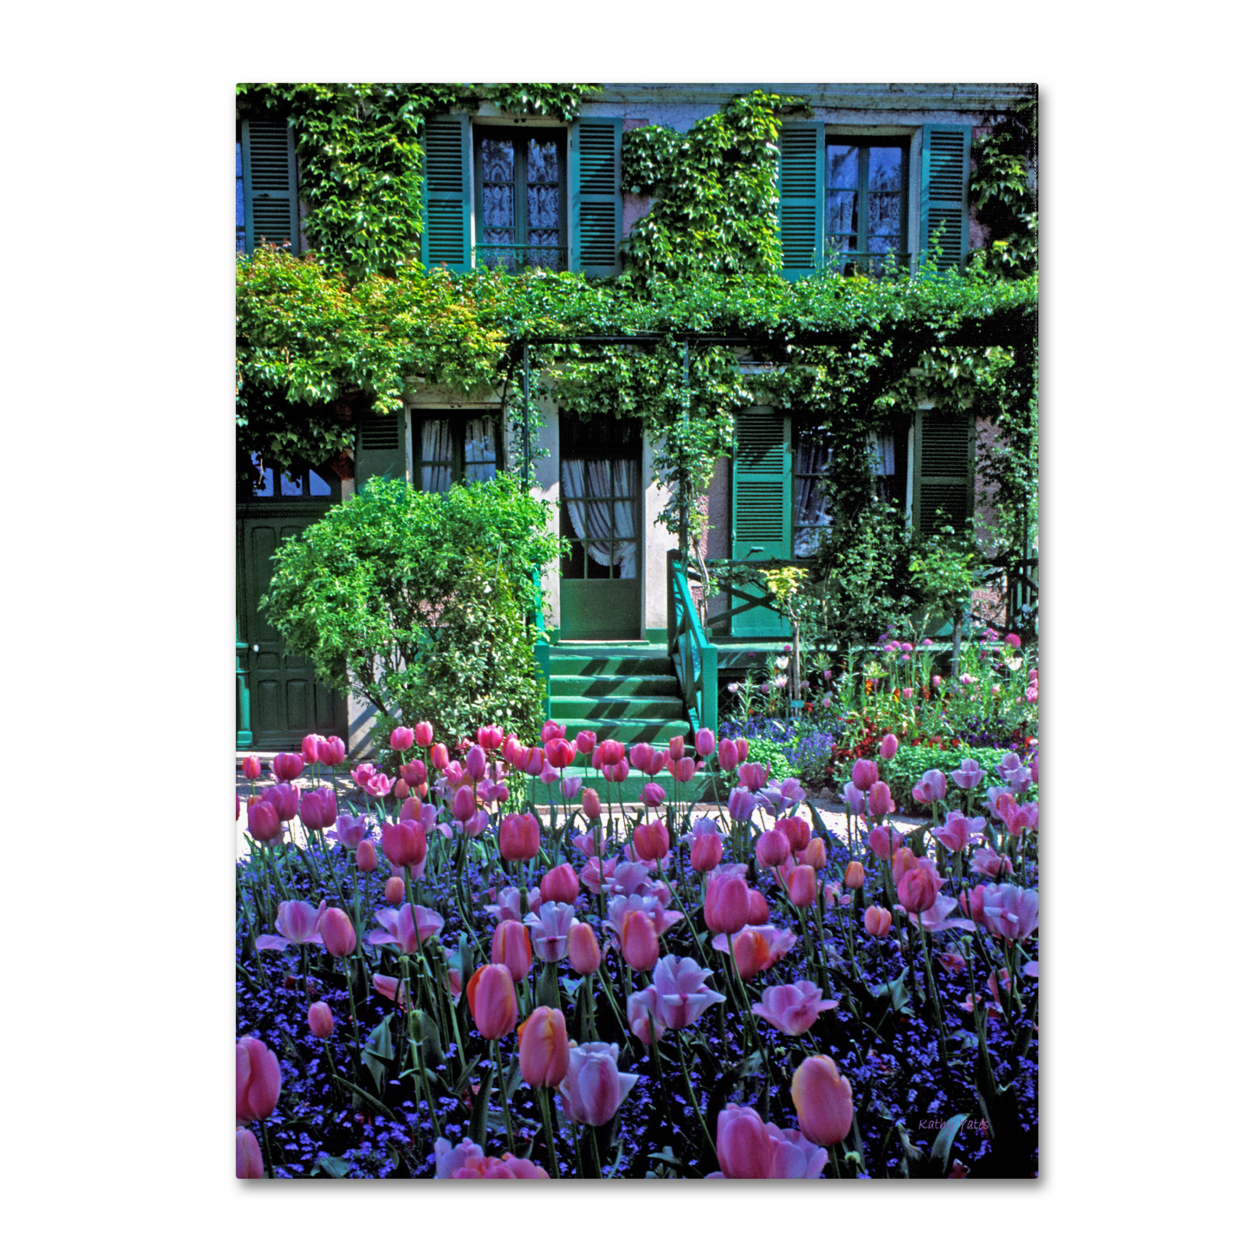 Kathy Yates 'Monet's House With Tulips' Canvas Wall Art 35 X 47 Inches